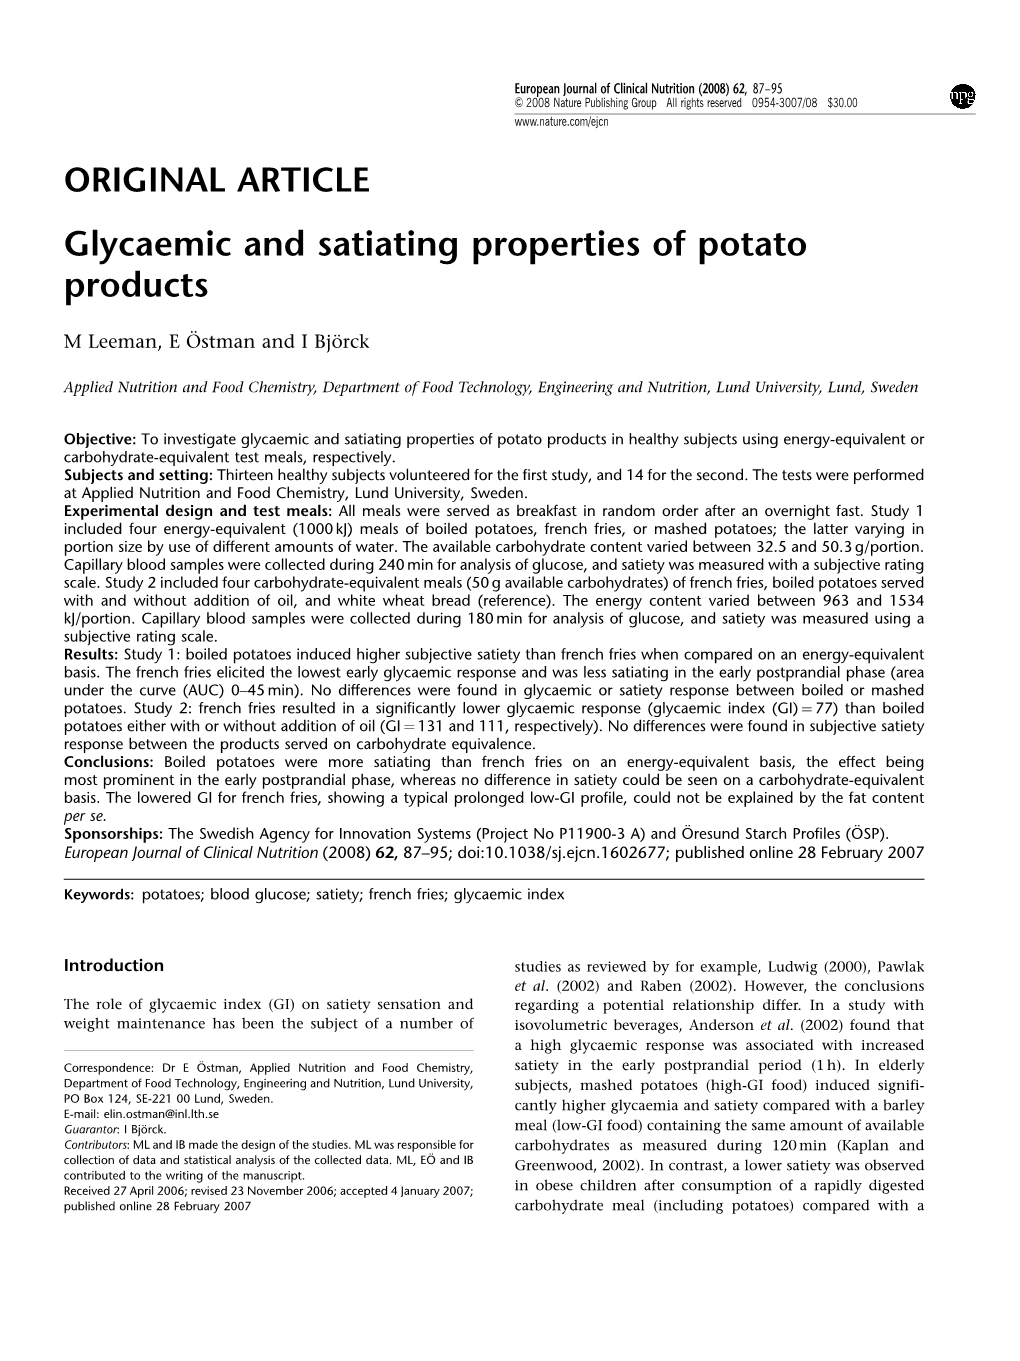 Glycaemic and Satiating Properties of Potato Products